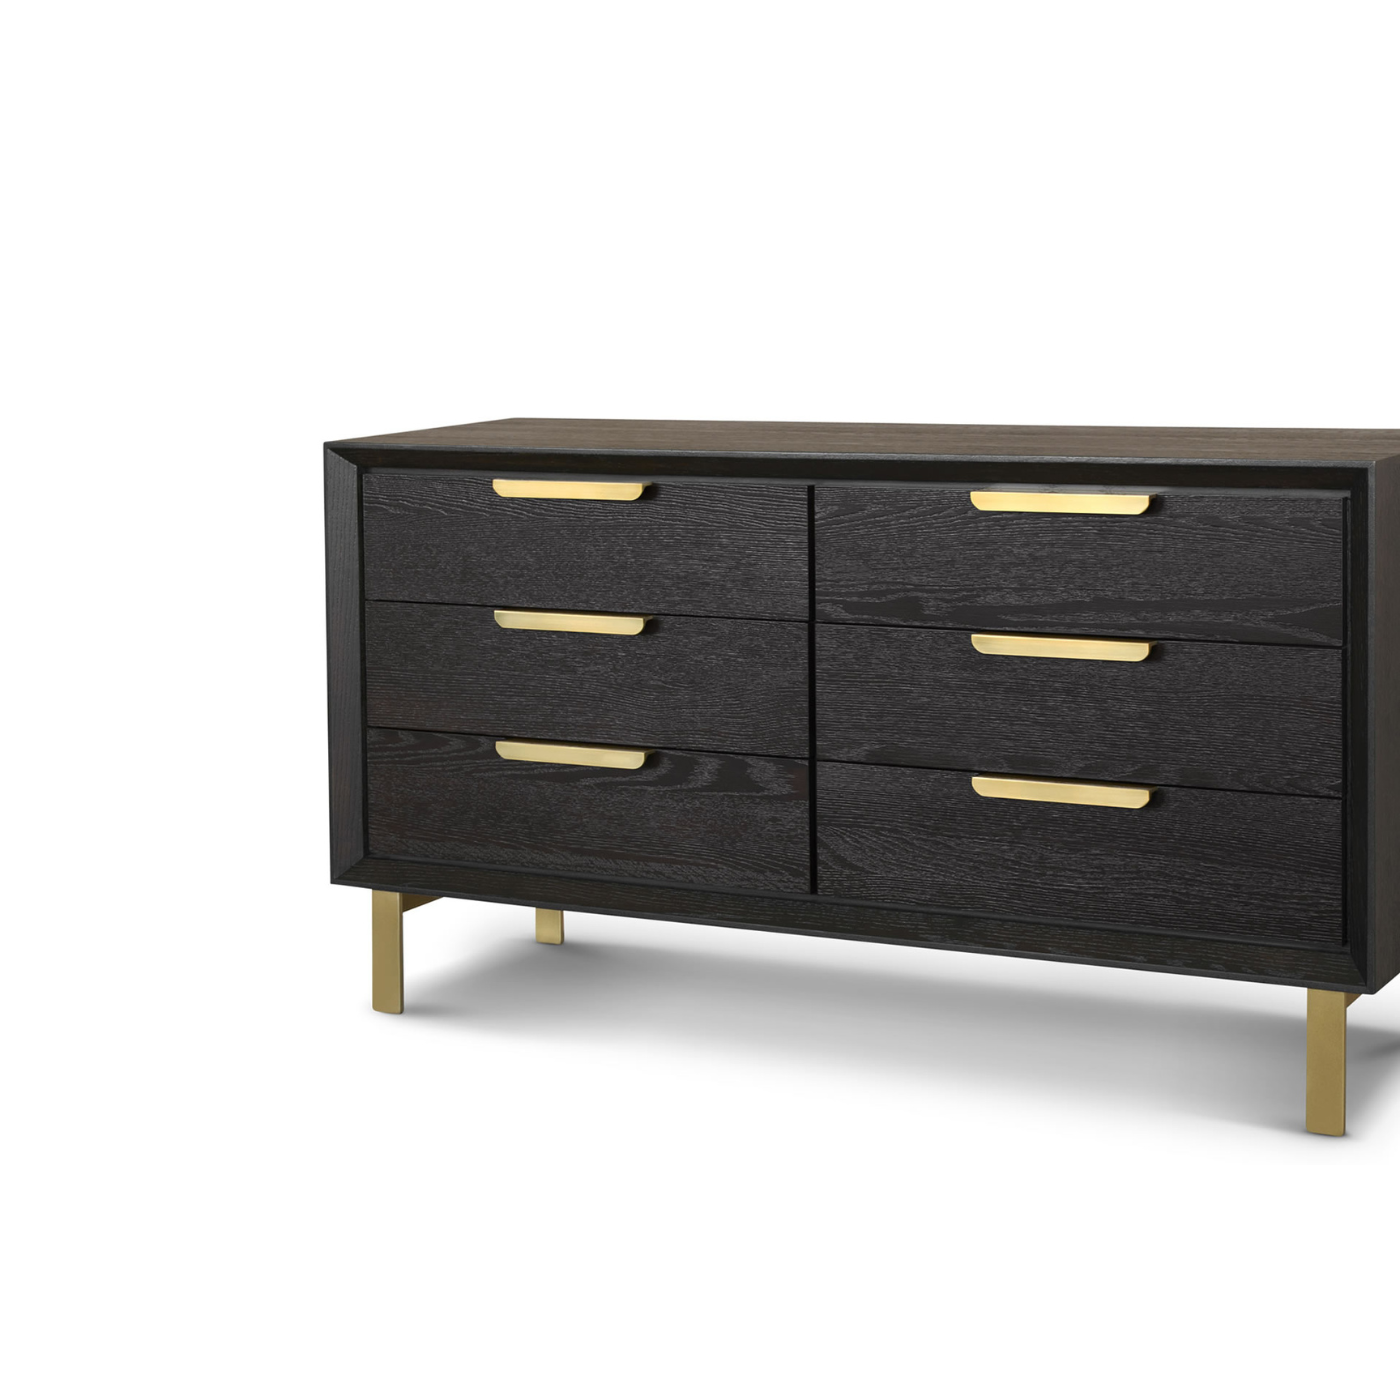 Aspen Dark Wooden 6-Drawer Chest of Drawers with Gold Handles by Berkeley Designs - Maison Rêves UK